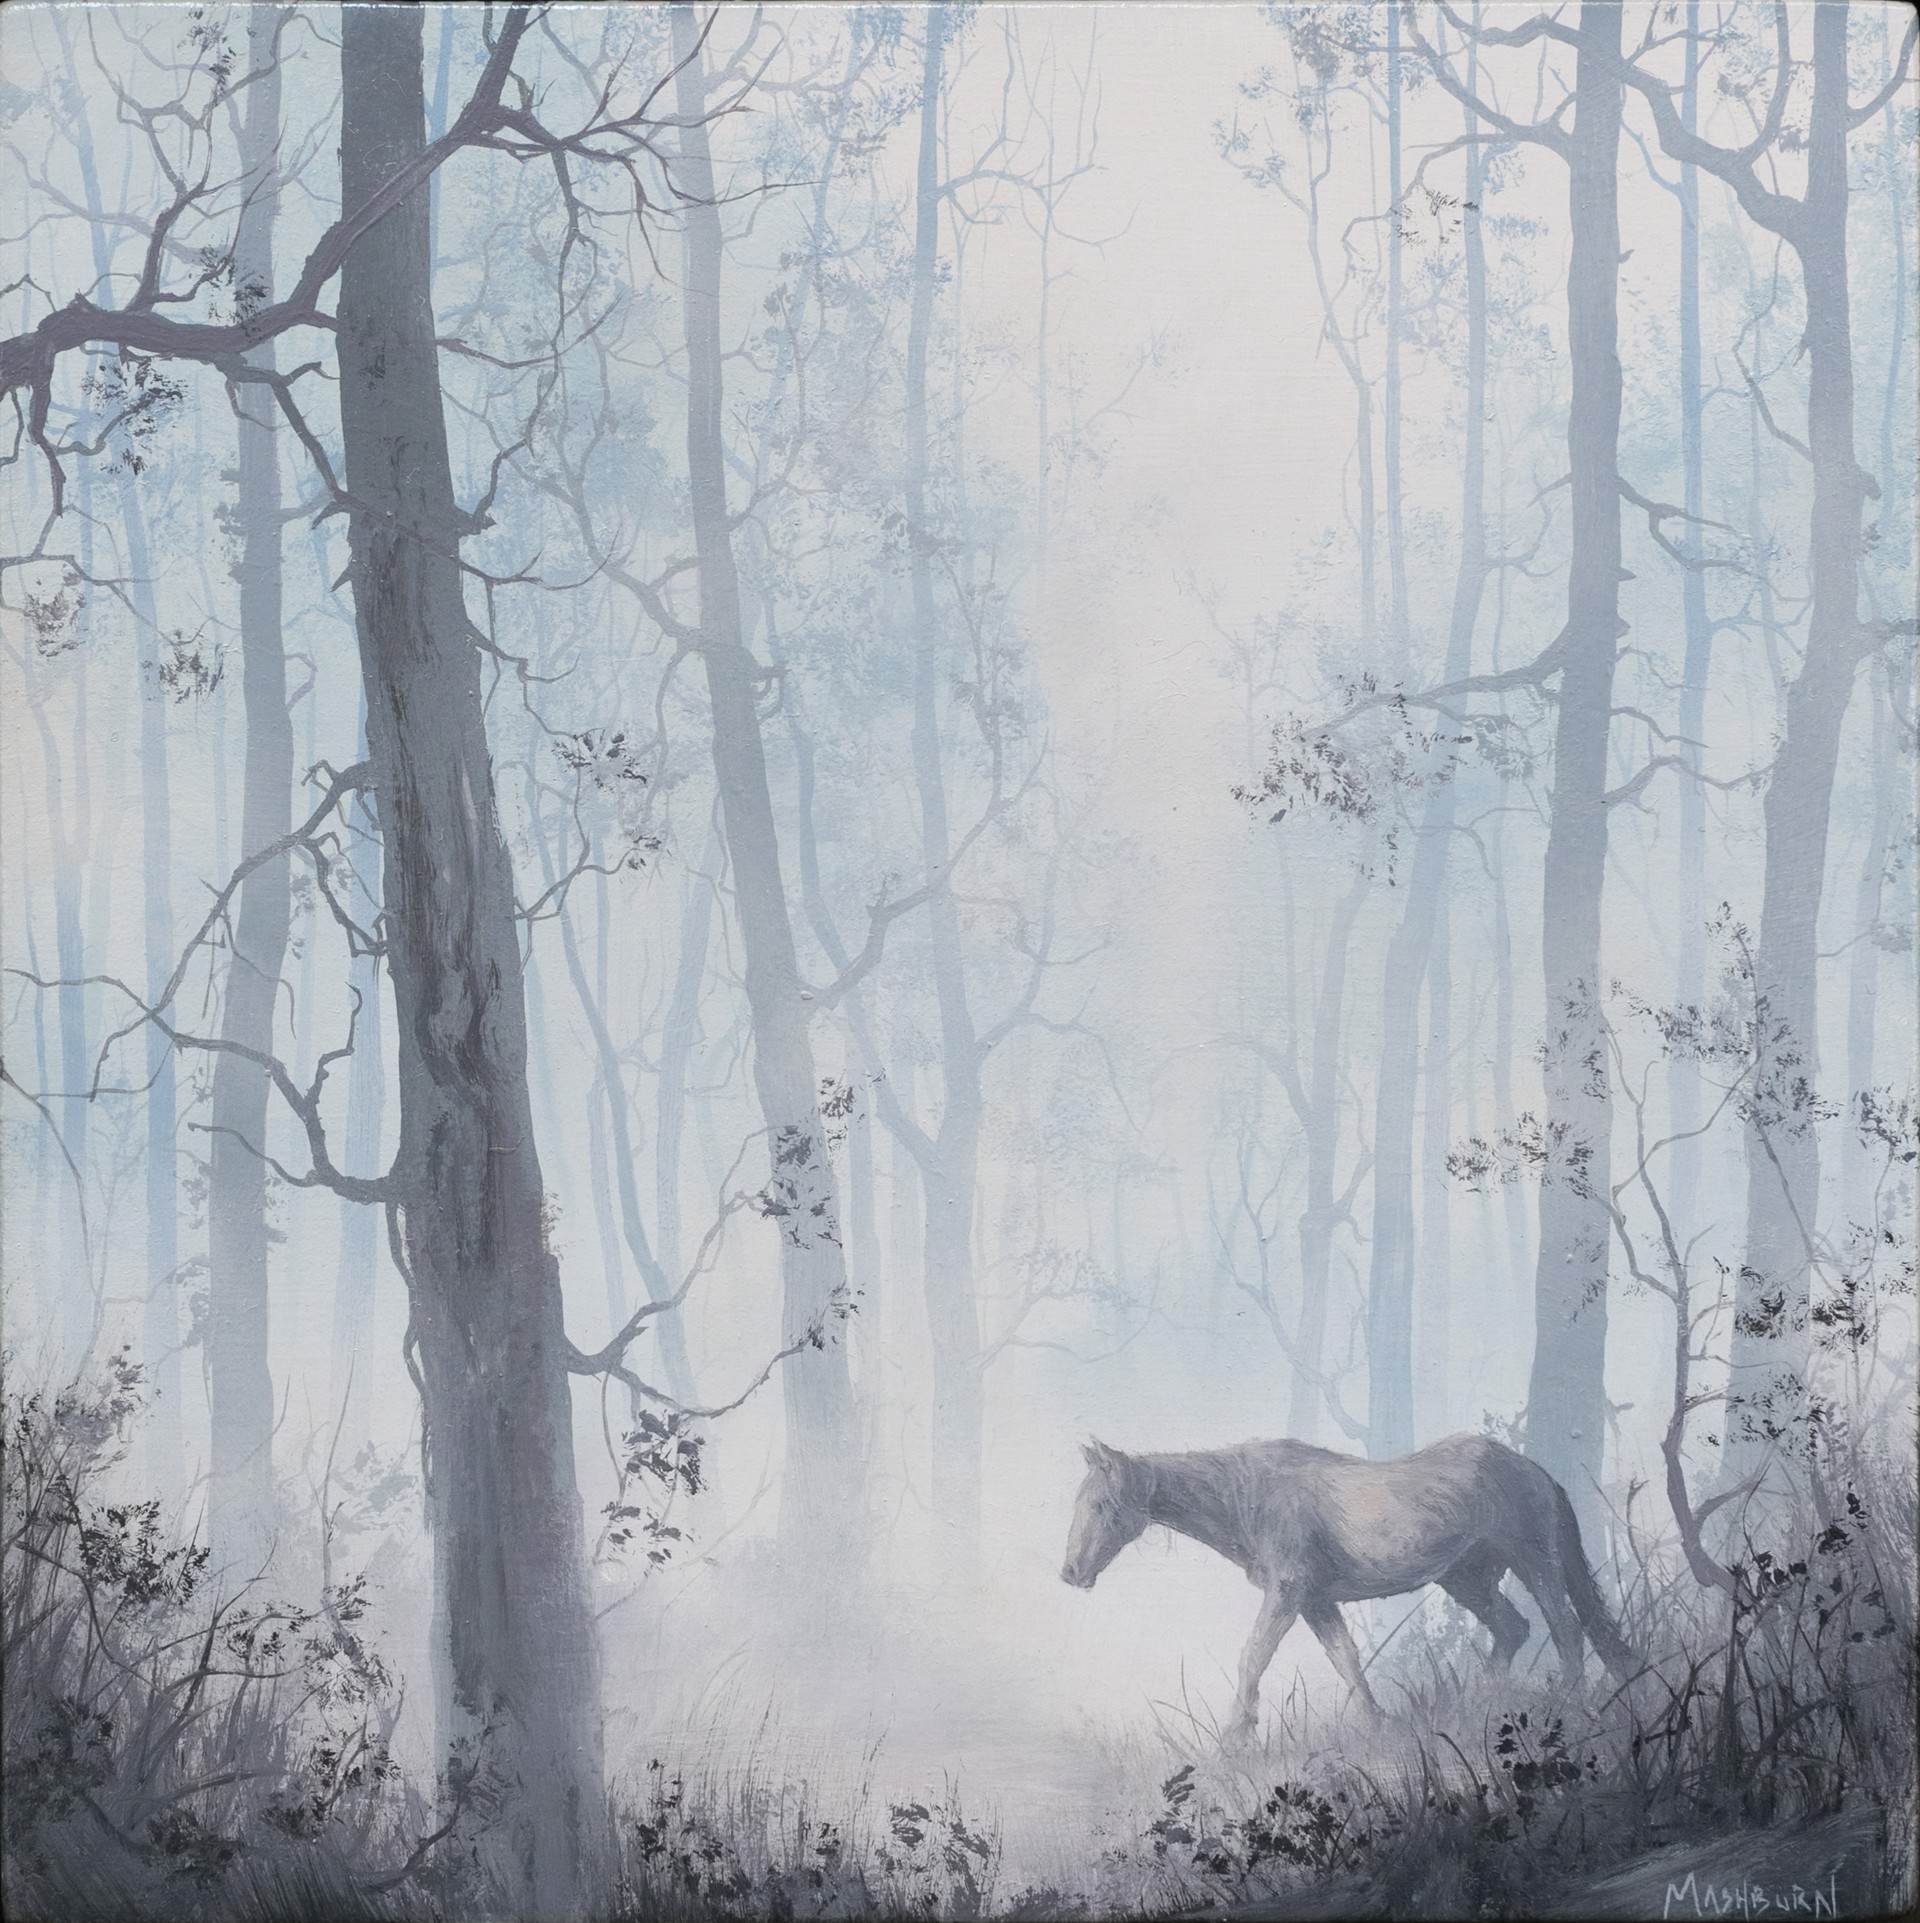 Horse Walking in a Pale Forest by Brian Mashburn